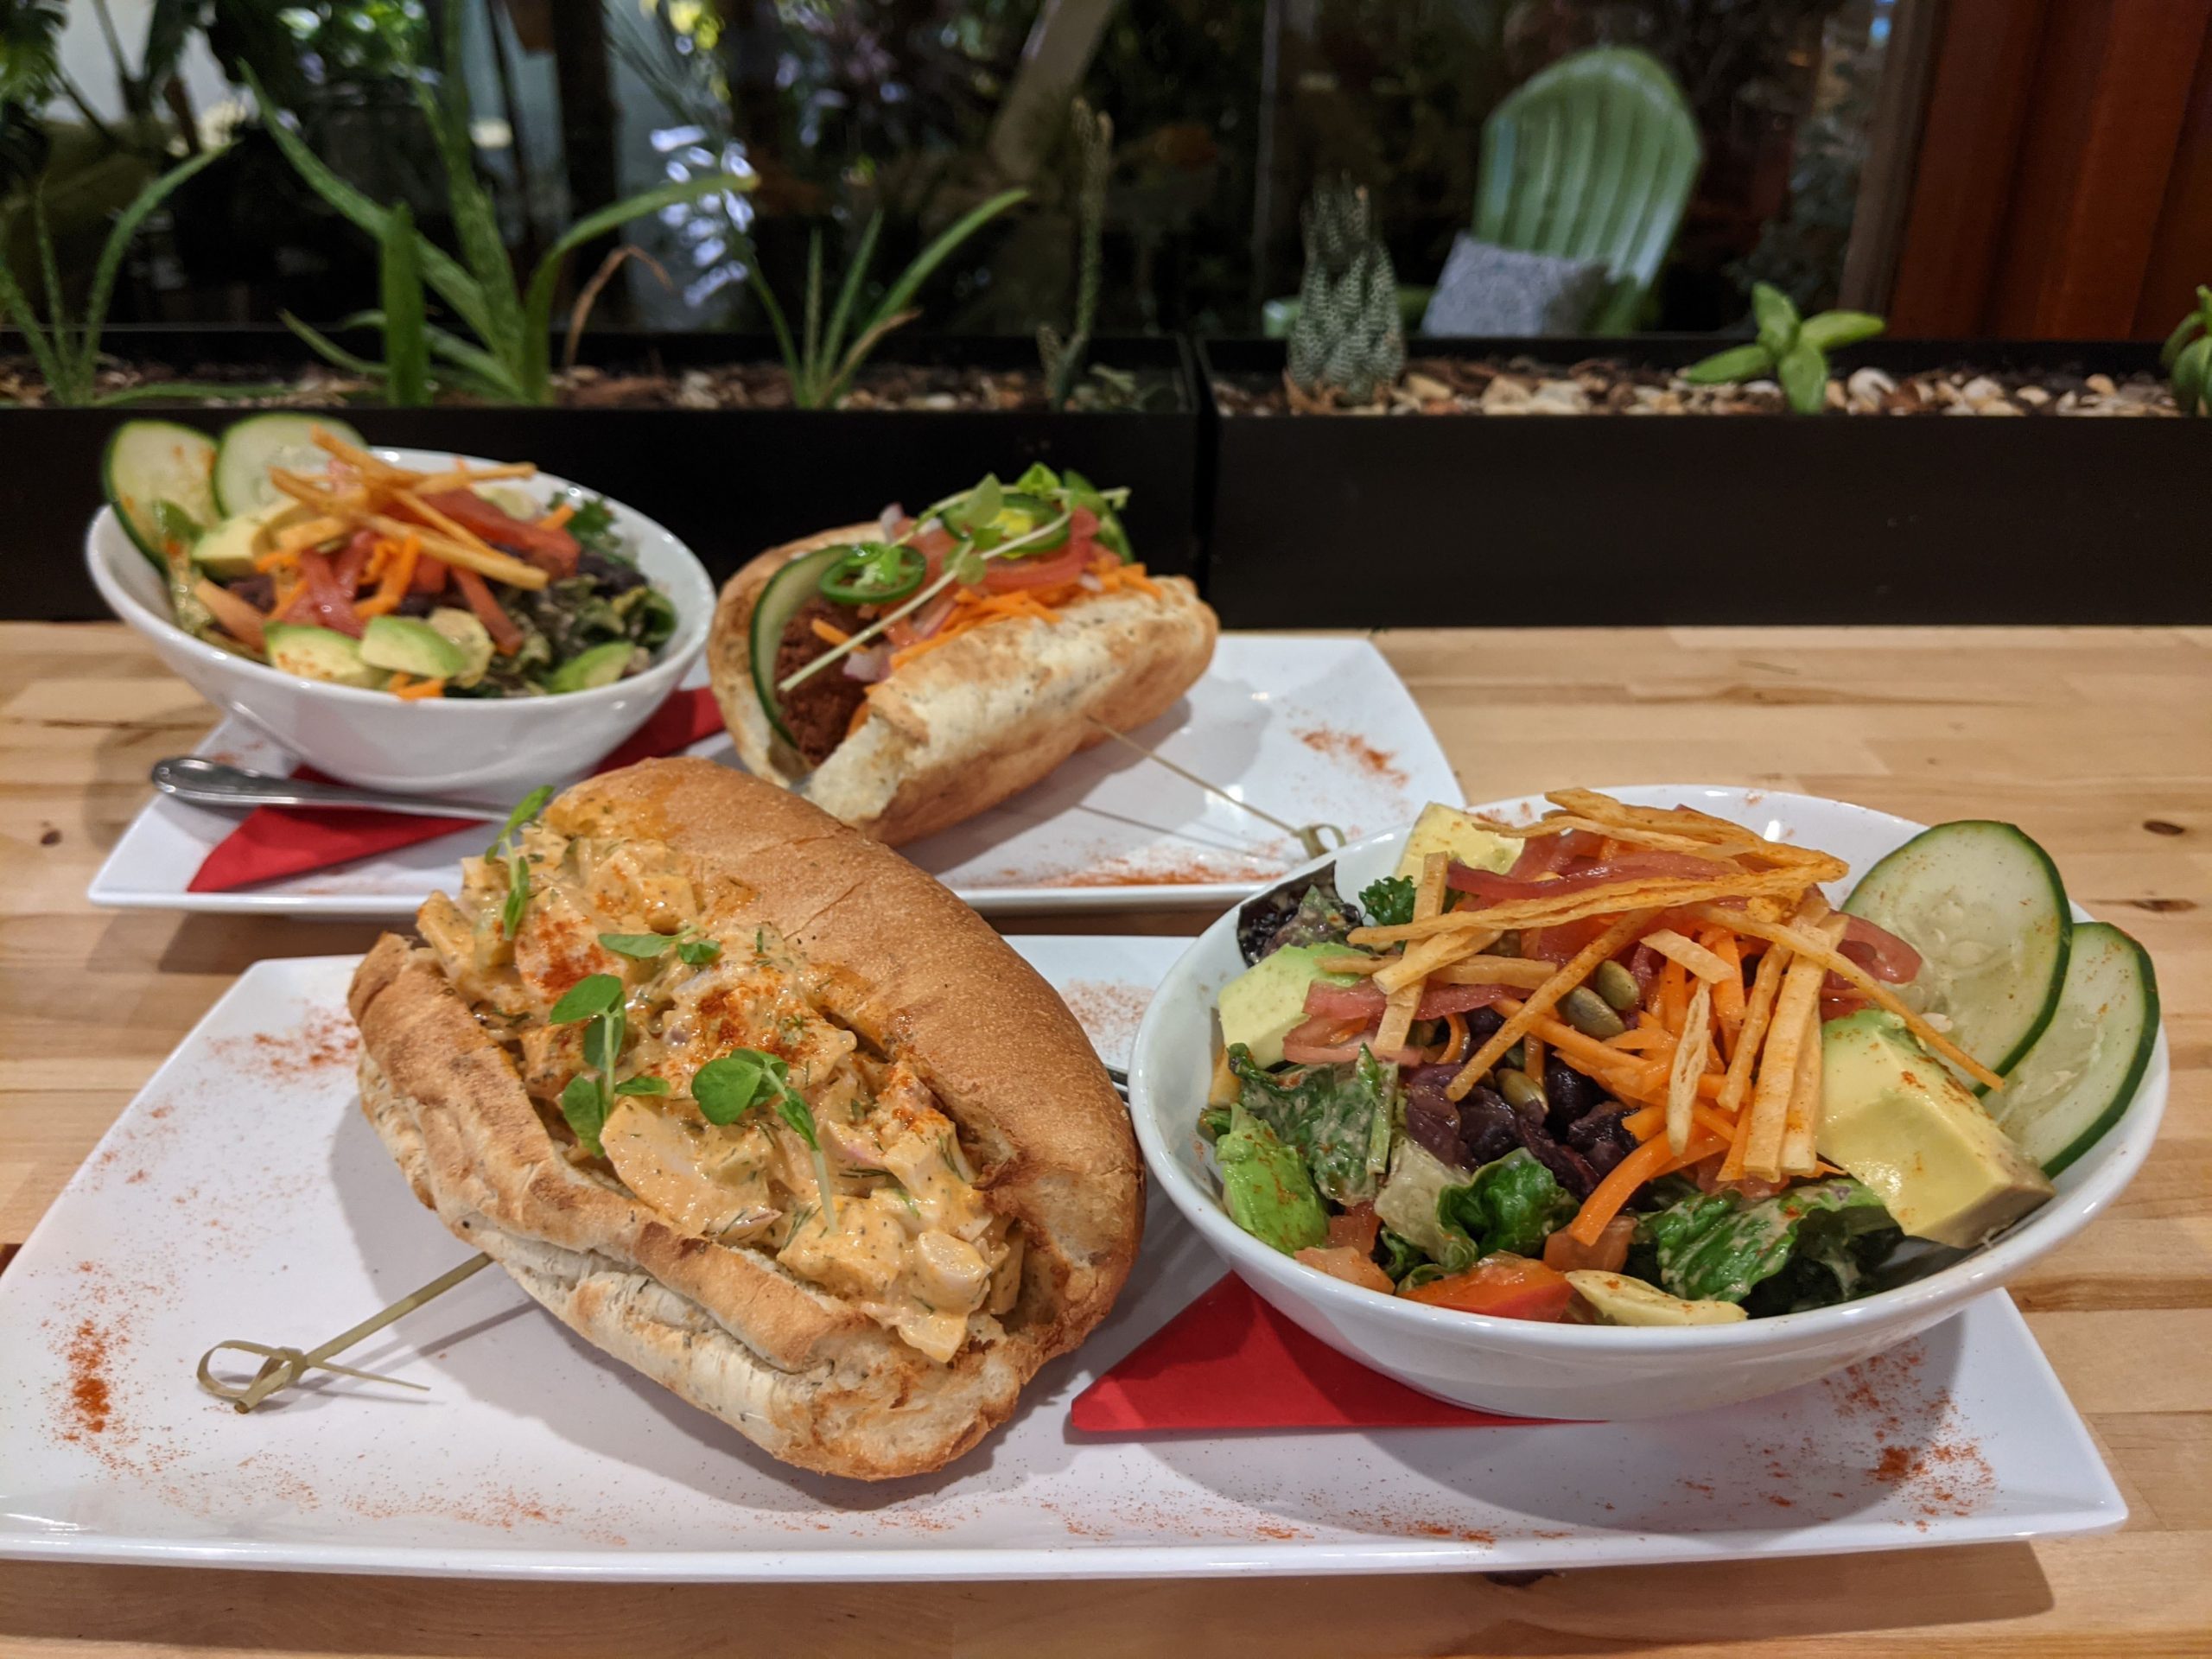 Lobster roll and bánh mì with a view of the outdoor patio at Green Cup Café